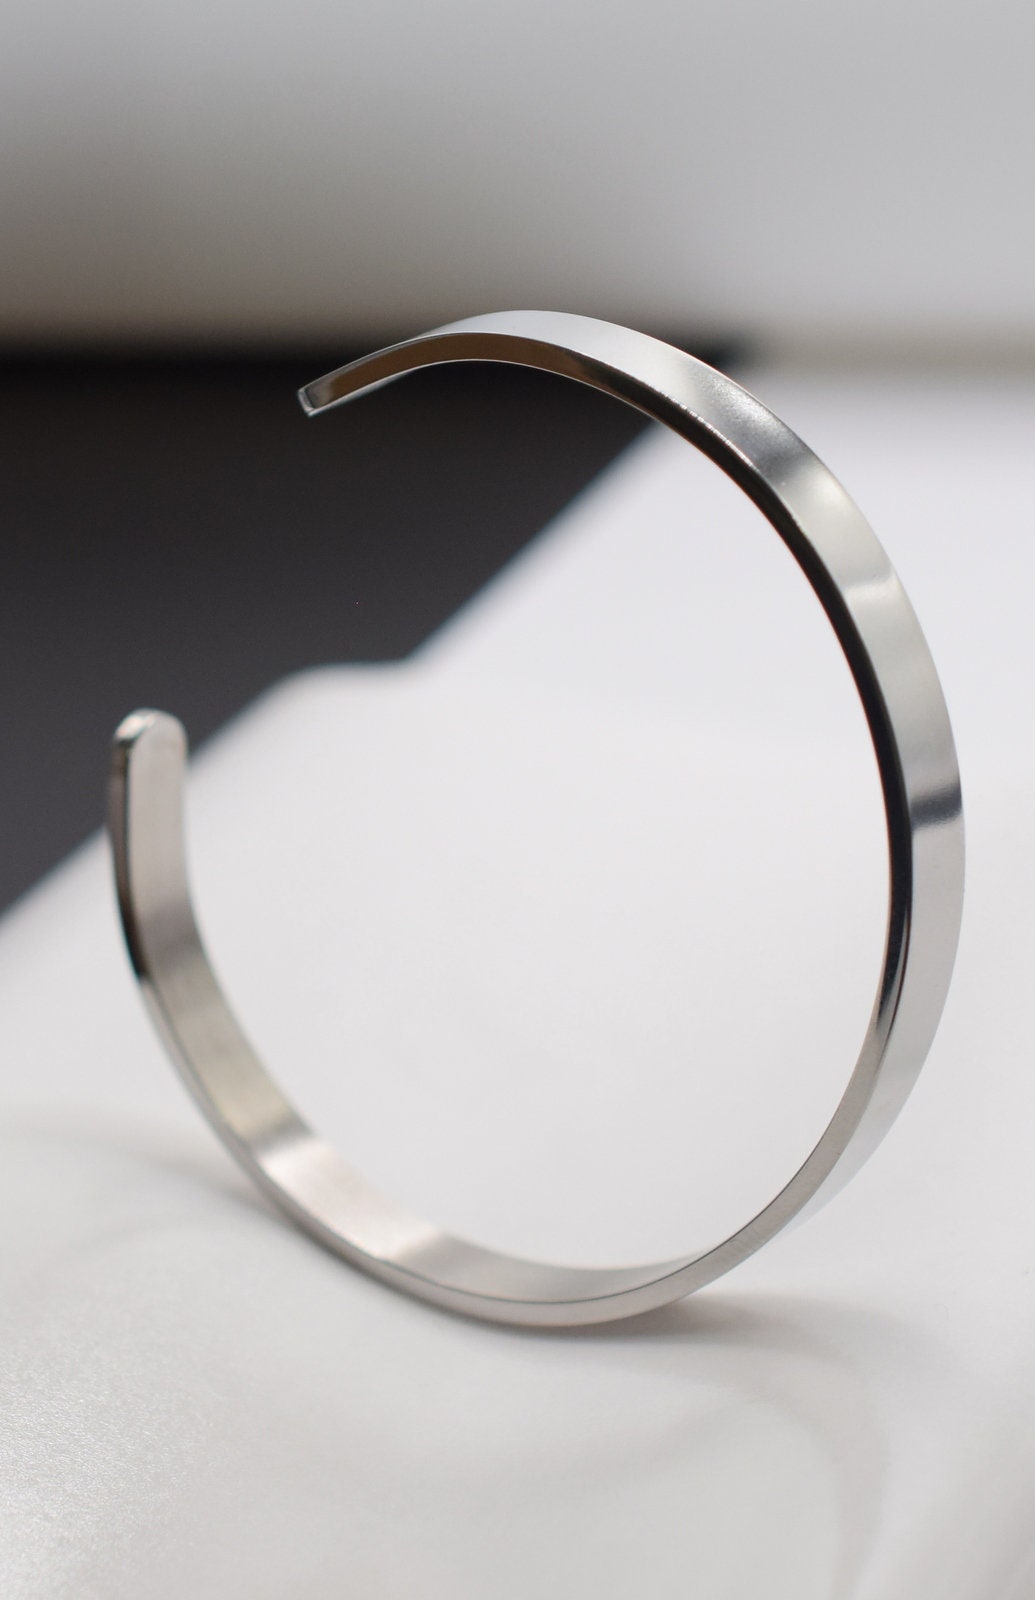 Plain Stainless Steel Bangle Unisex & Adjustable Approx Size 65mm For Jewelry Making width 6mm